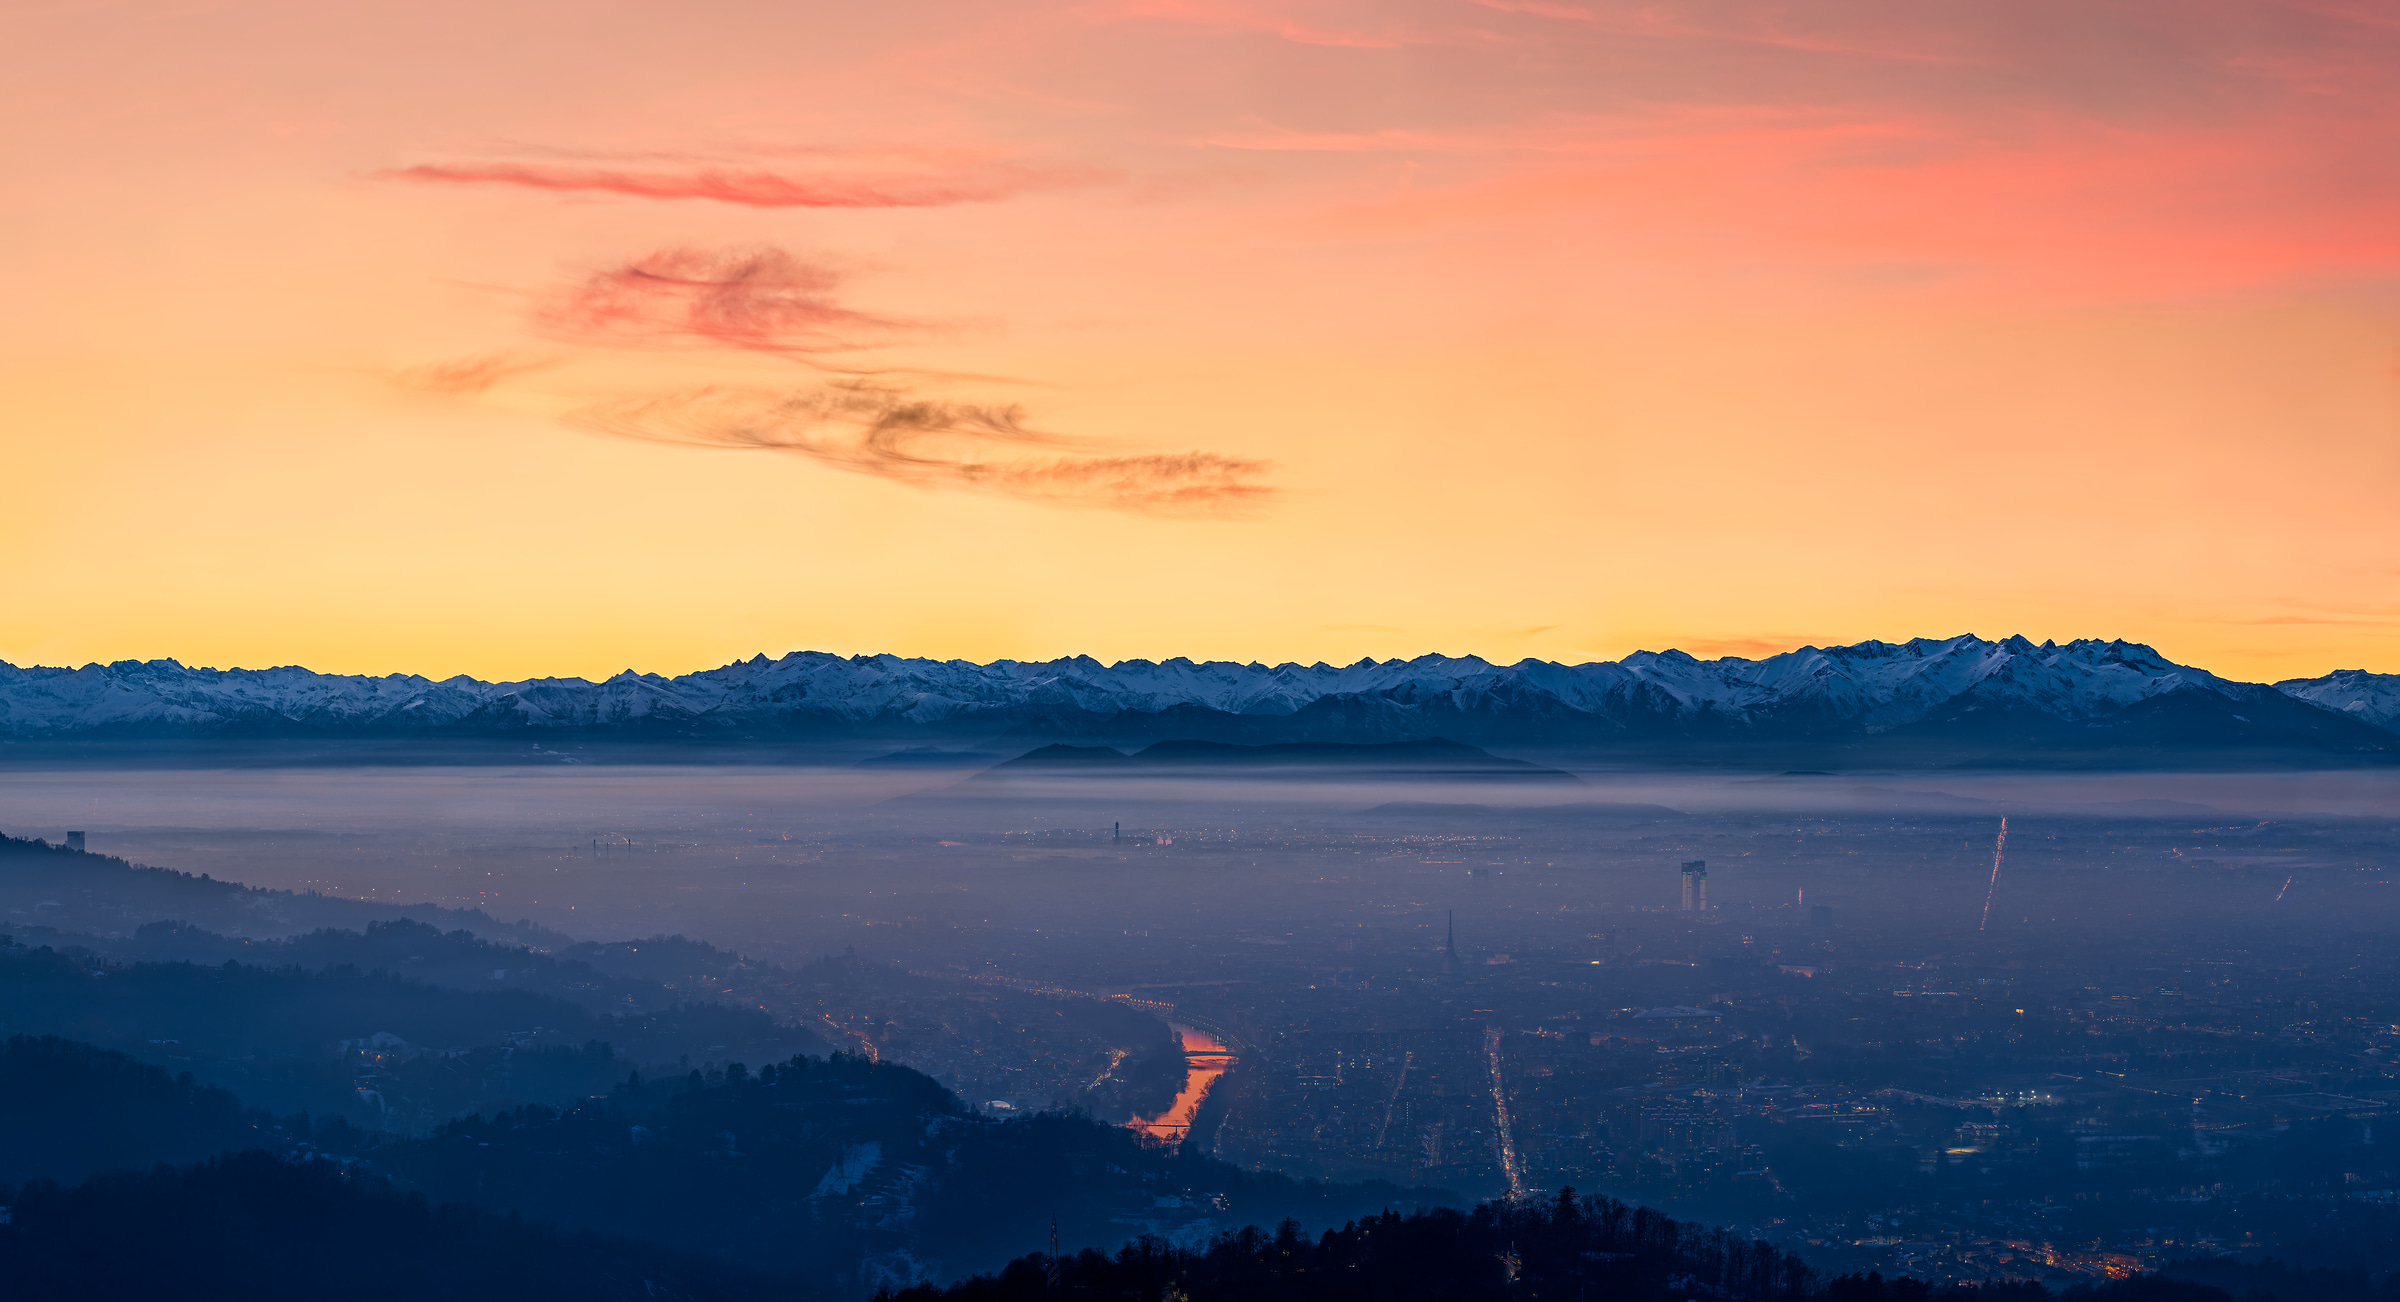 1,613 megapixels! A very high resolution, large-format VAST photo print of the Turin, Italy cityscape at sunset with the Alps mountains in the background; landscape photograph created by Duilio Fiorille in Turin, Italy.